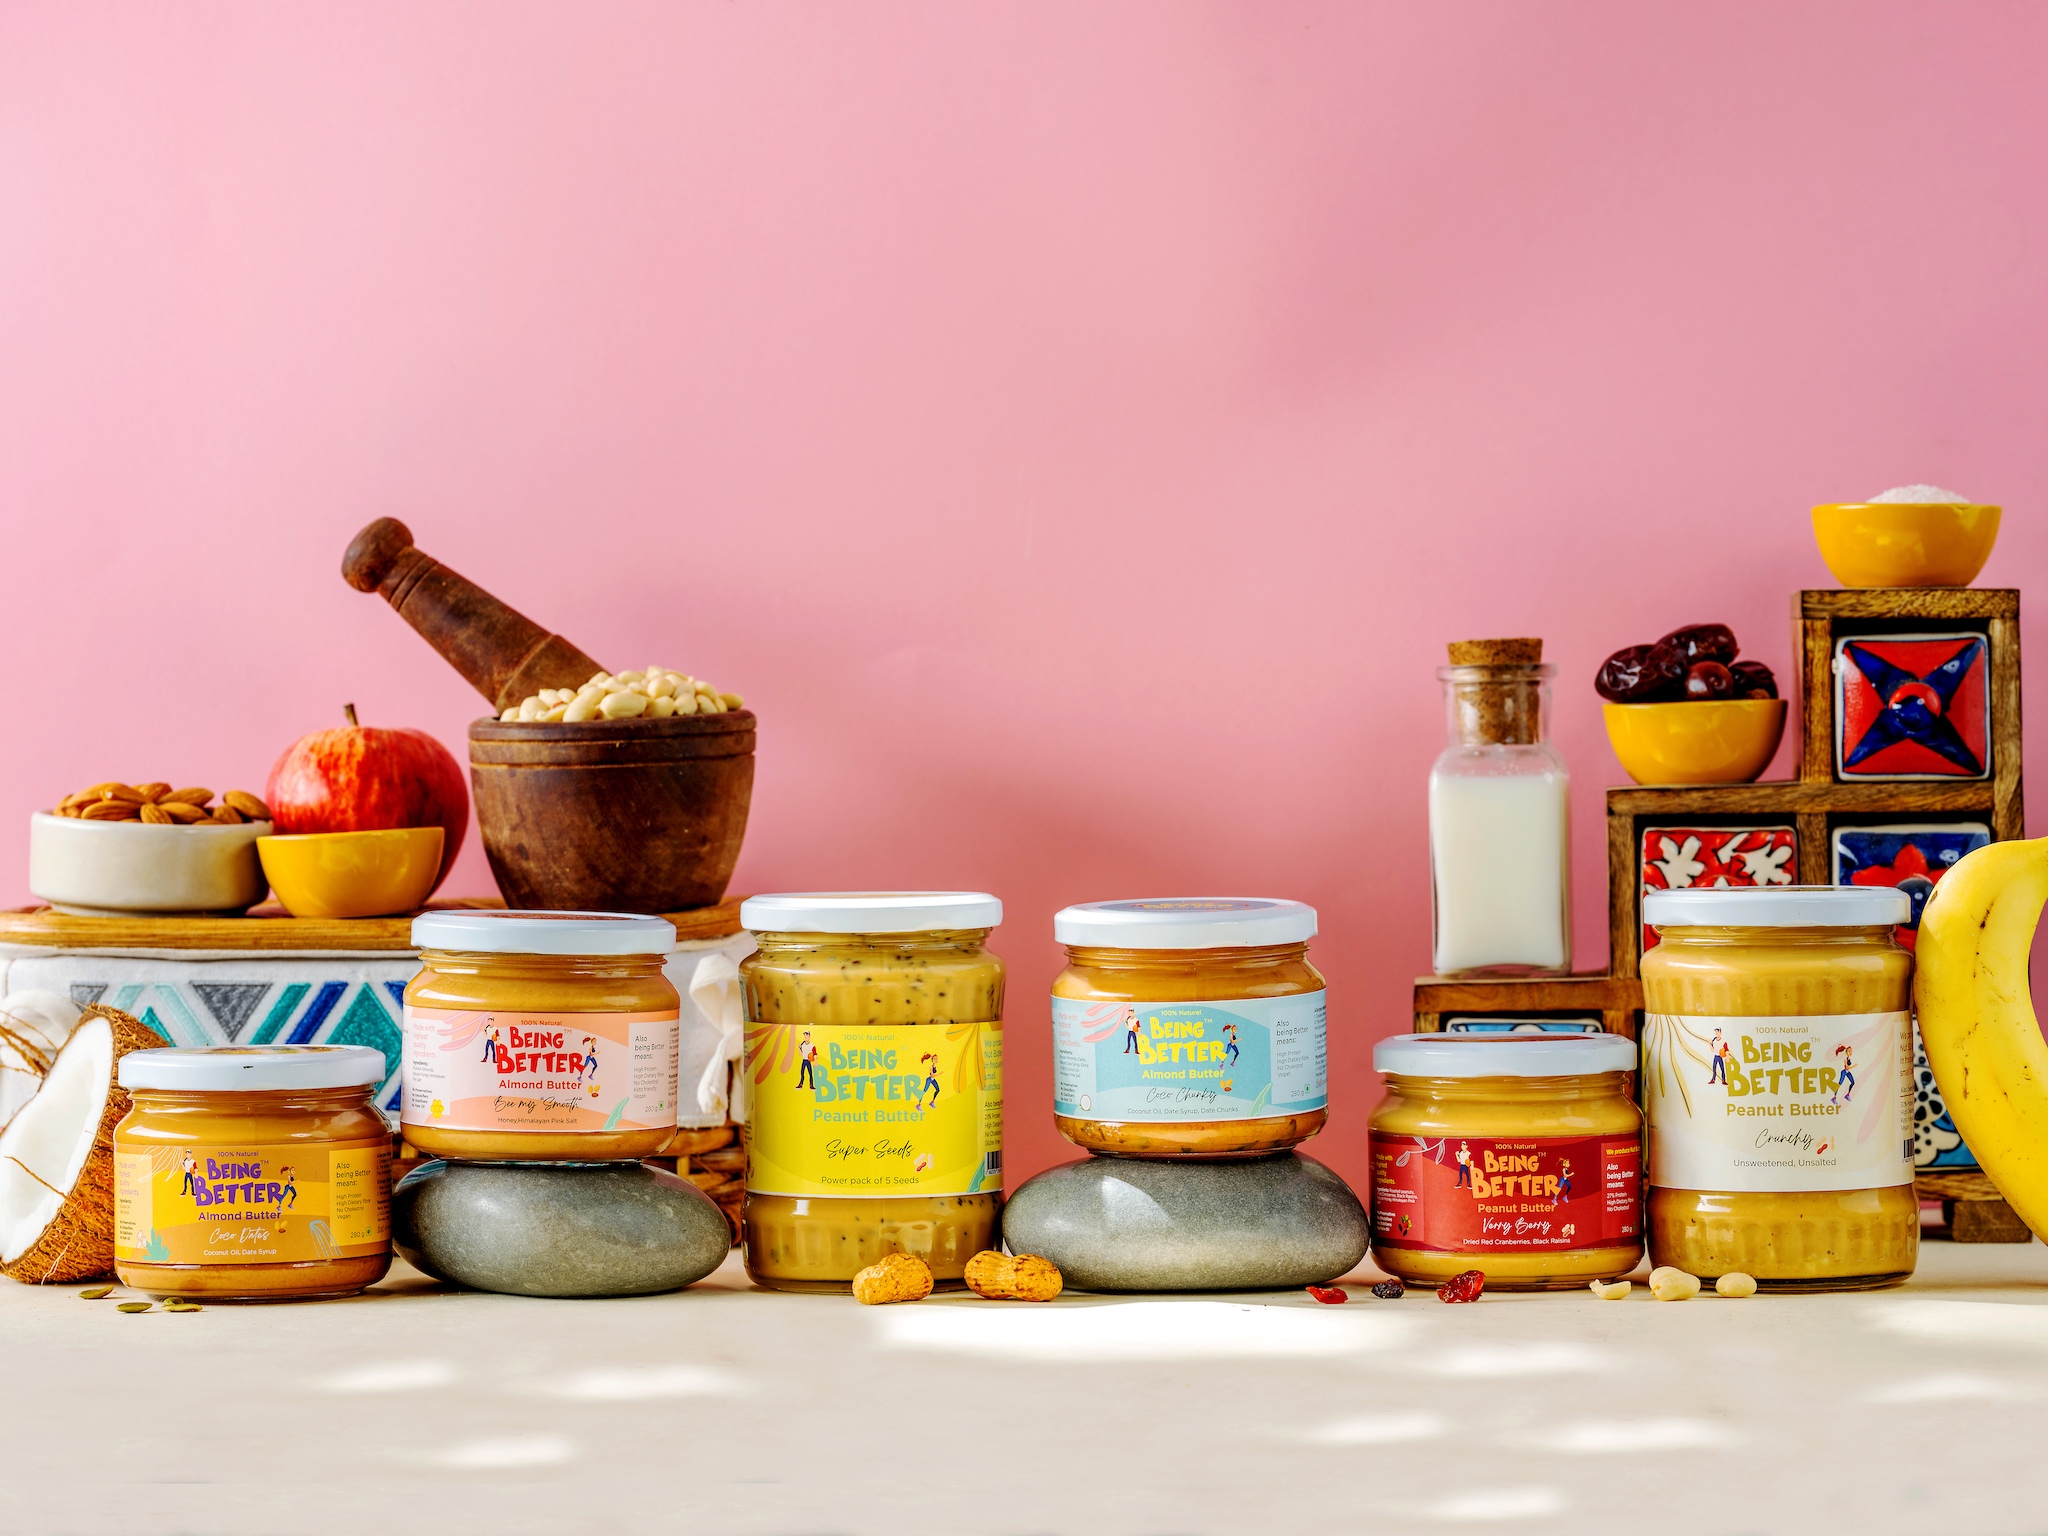 All Natural Peanut Butter, Almond Butter, Chocolate Peanut Butters entire range by Being better